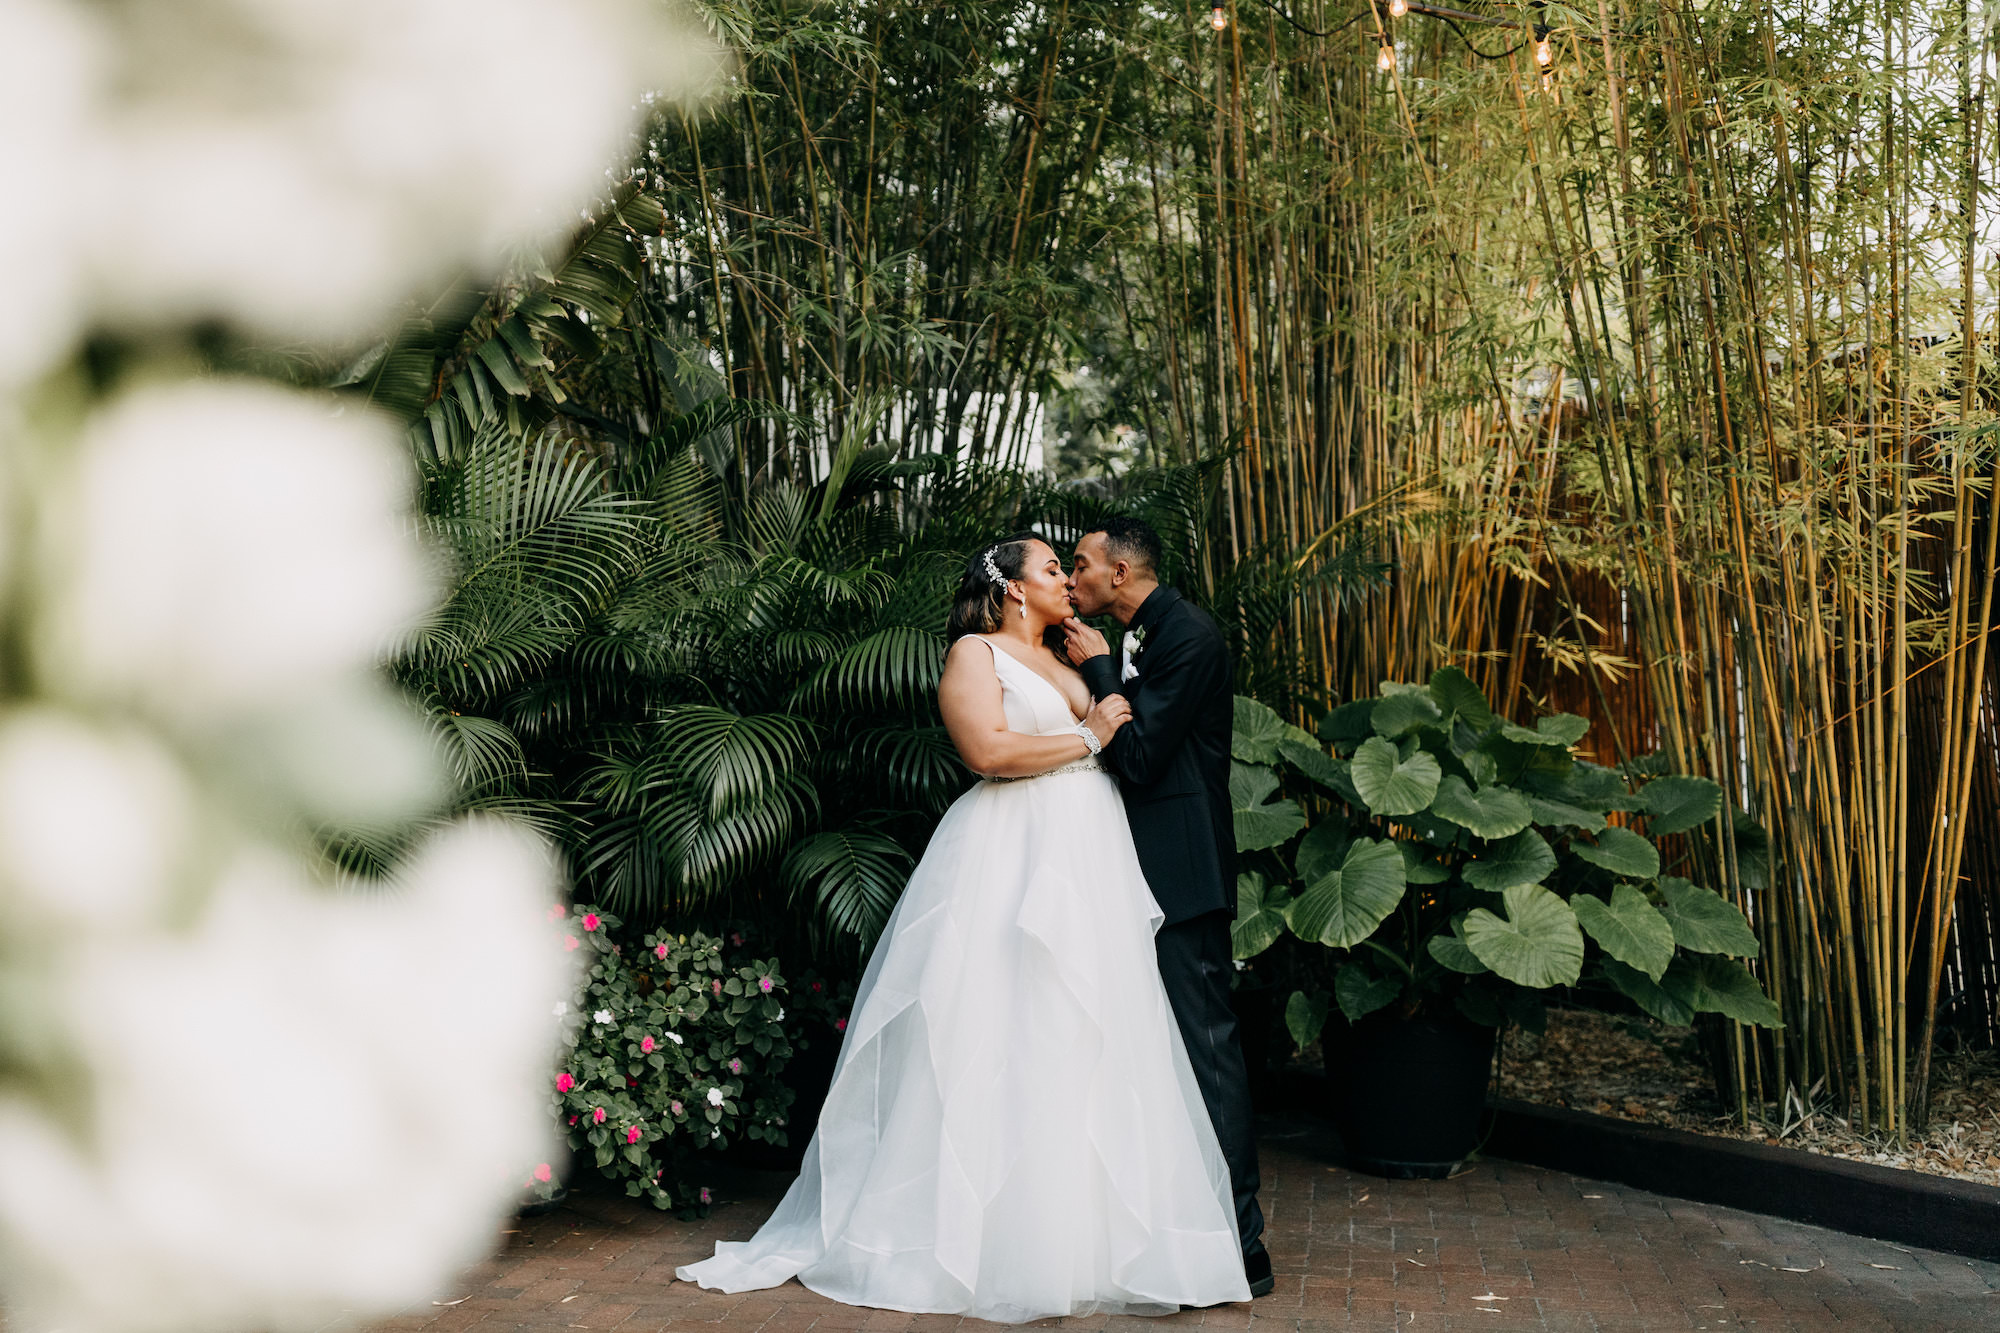 Classic Simple Bride and Groom Wedding Outdoor Bamboo Courtyard Unique Downtown Tampa Wedding Venue NOVA 535 | Wedding Photographer Amber McWhorter Photography